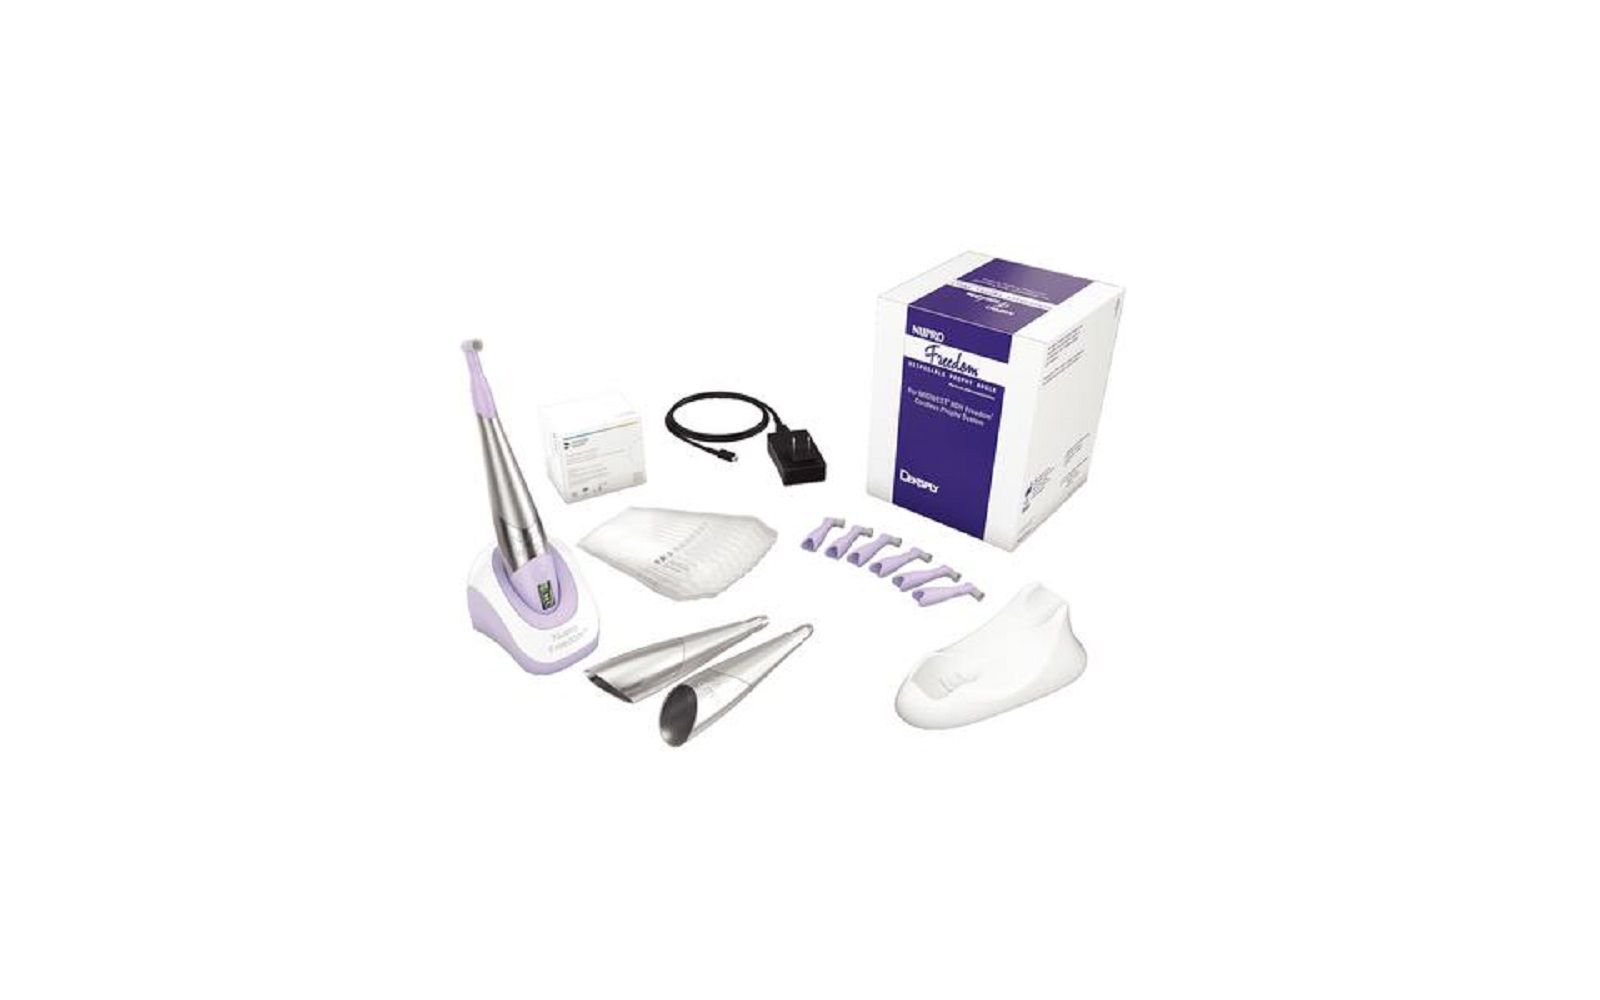 Nupro freedom™ cordless prophy system